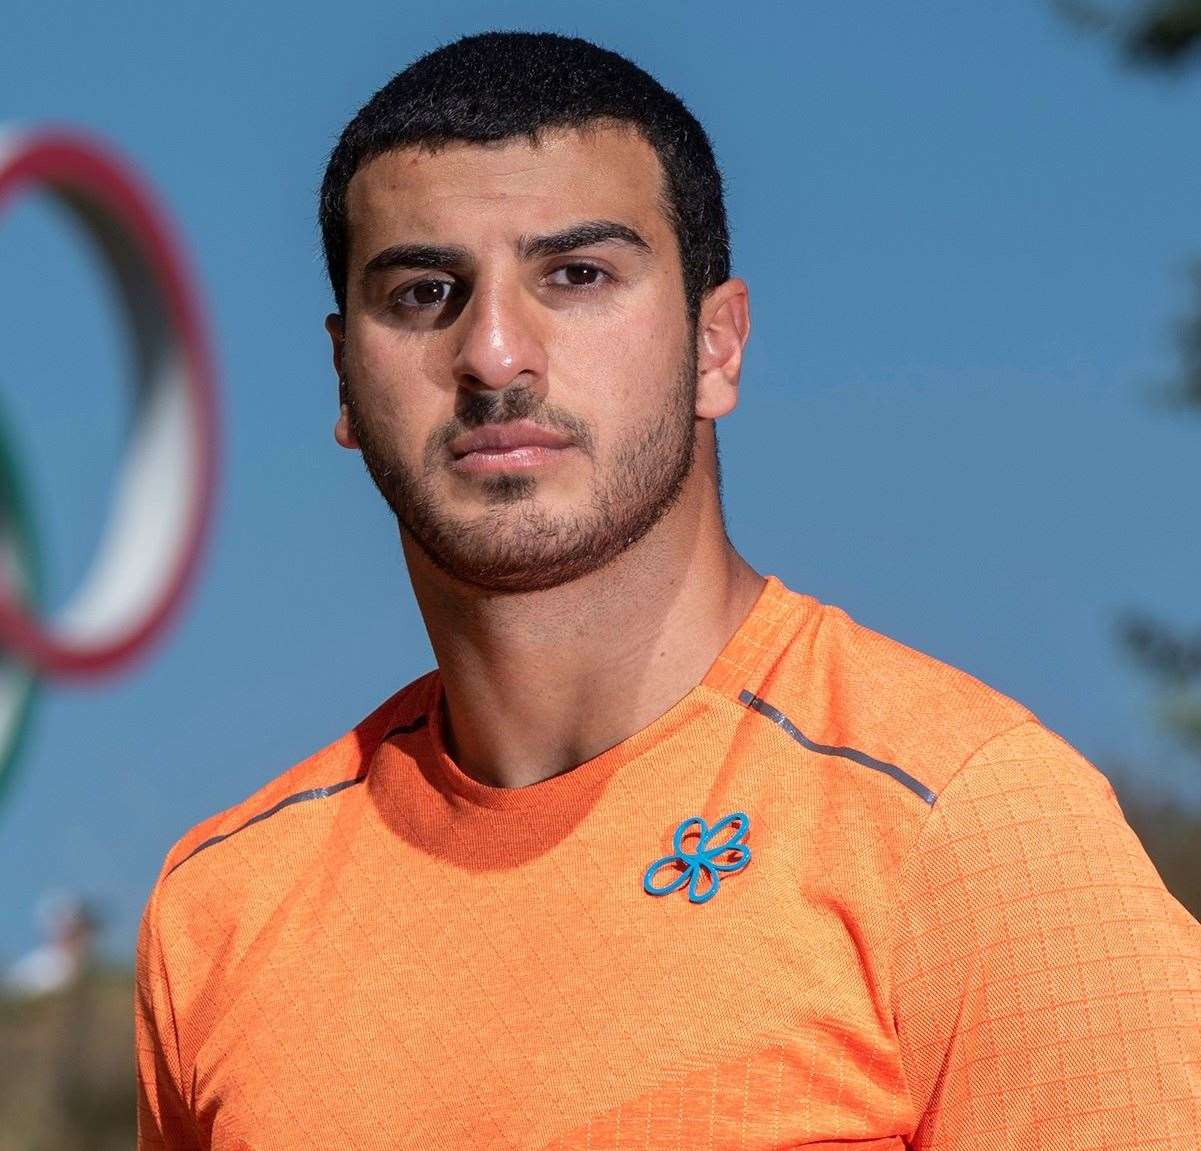 Adam Gemili's hopes of a medal in the 200m at the World Championships ended at the heat stage. Picture: Alzheimer's Society